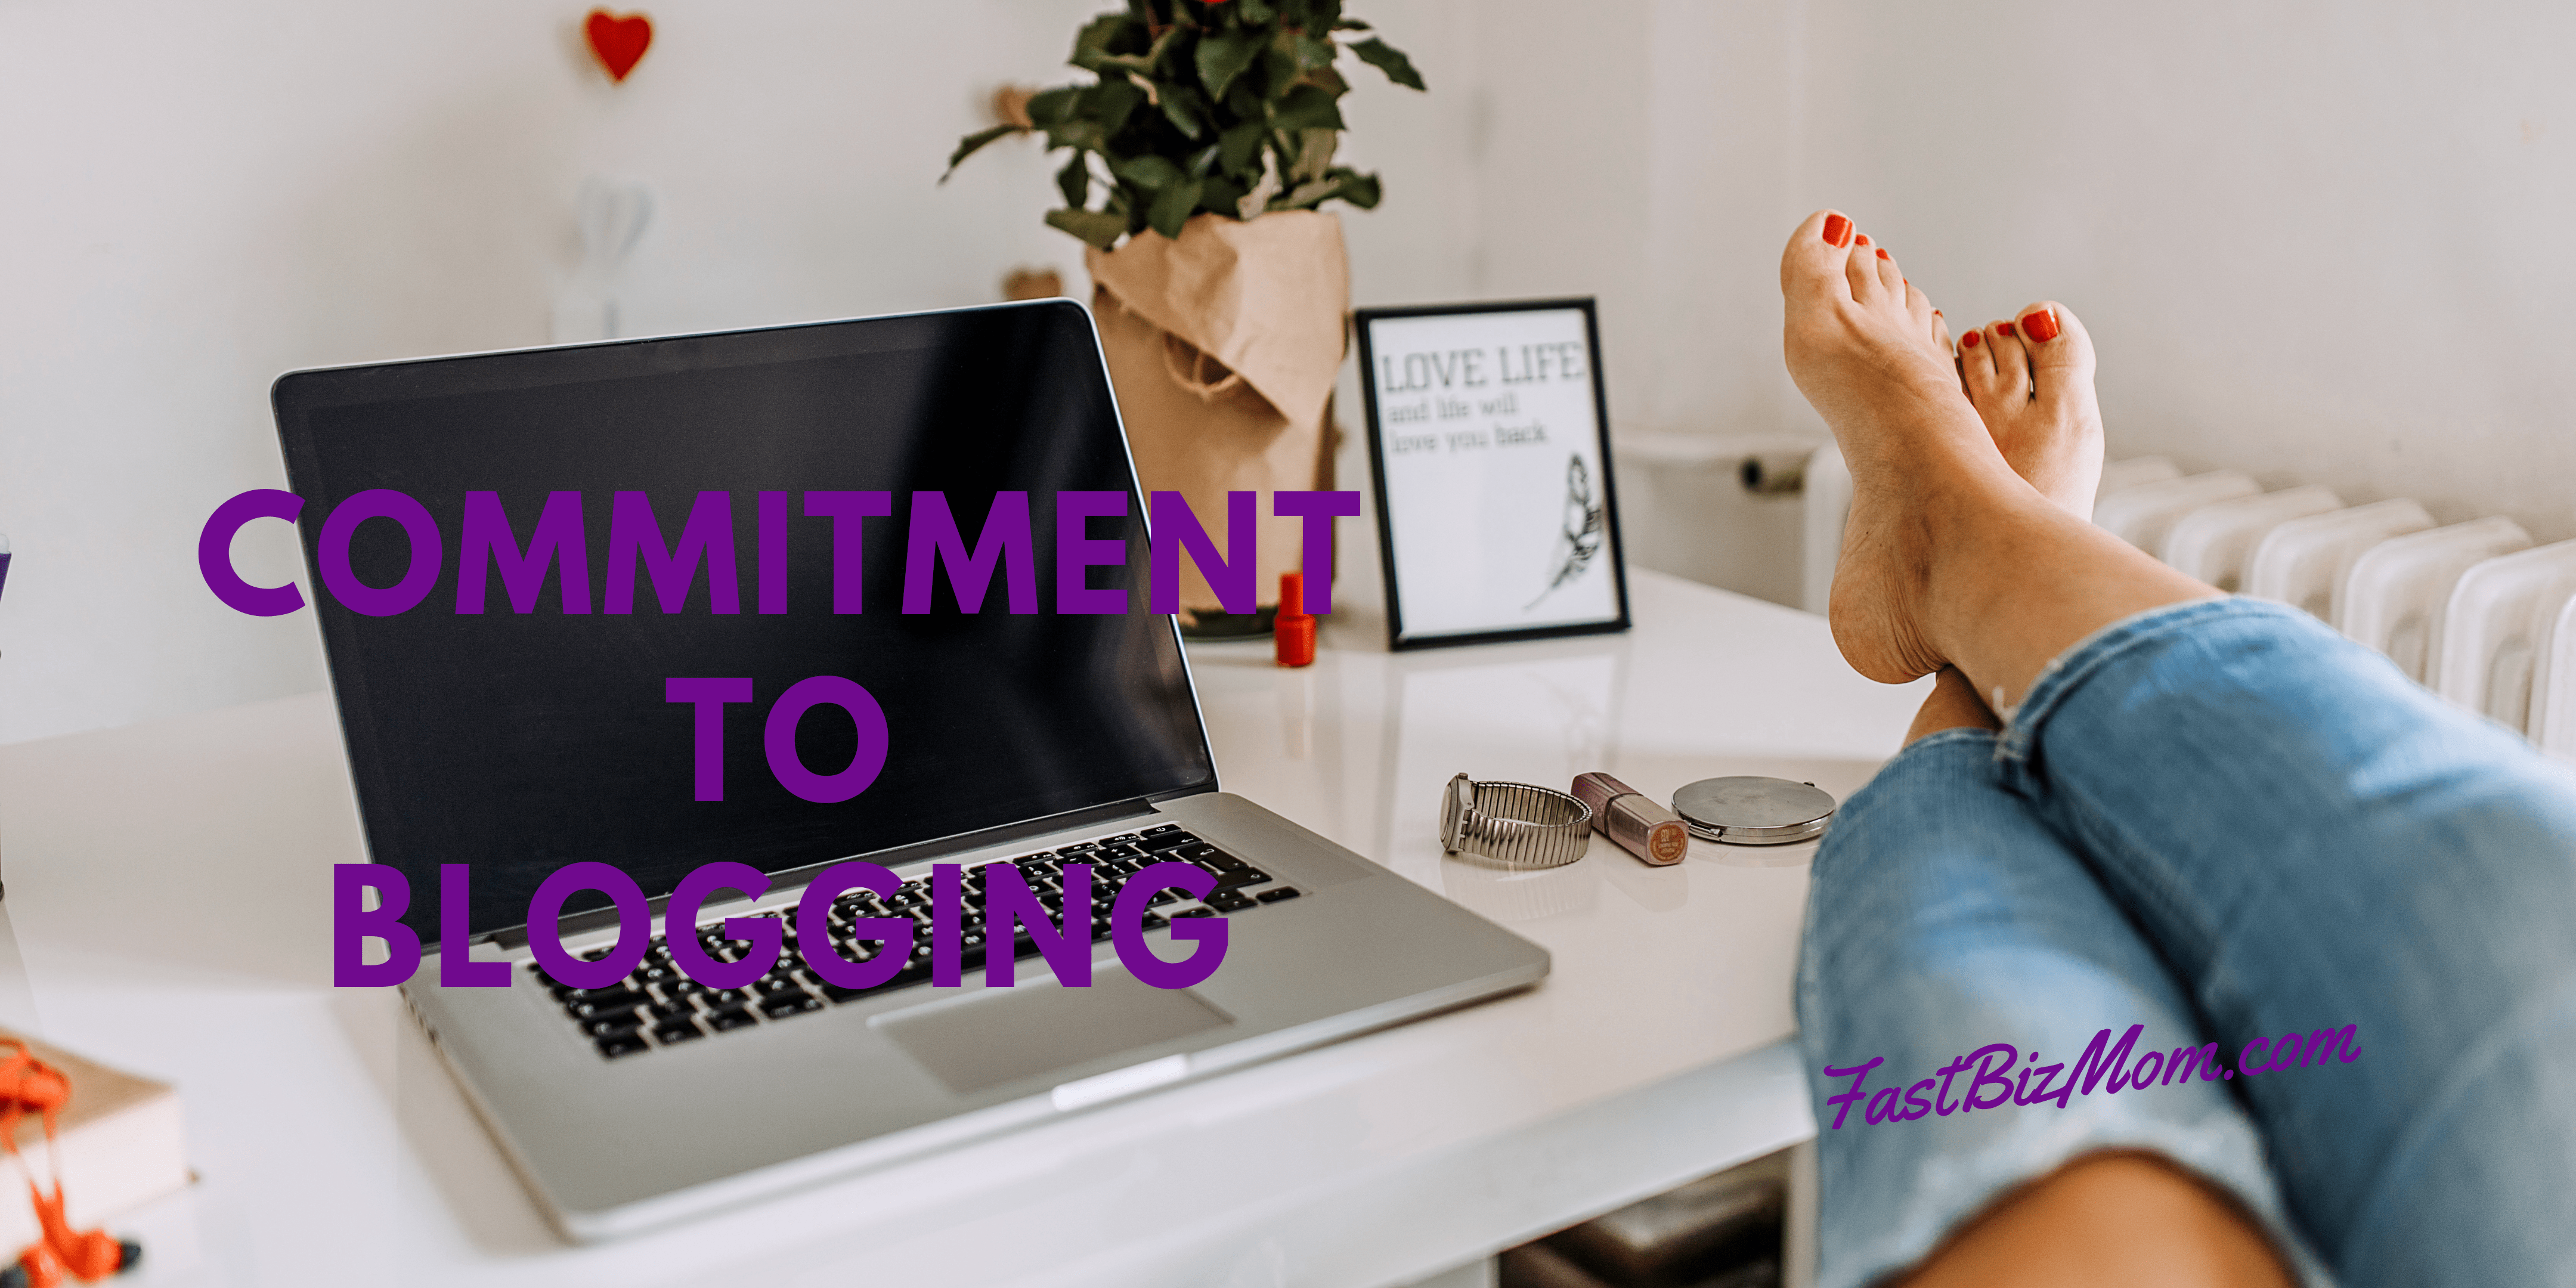 How to Make the Commitment to Blogging